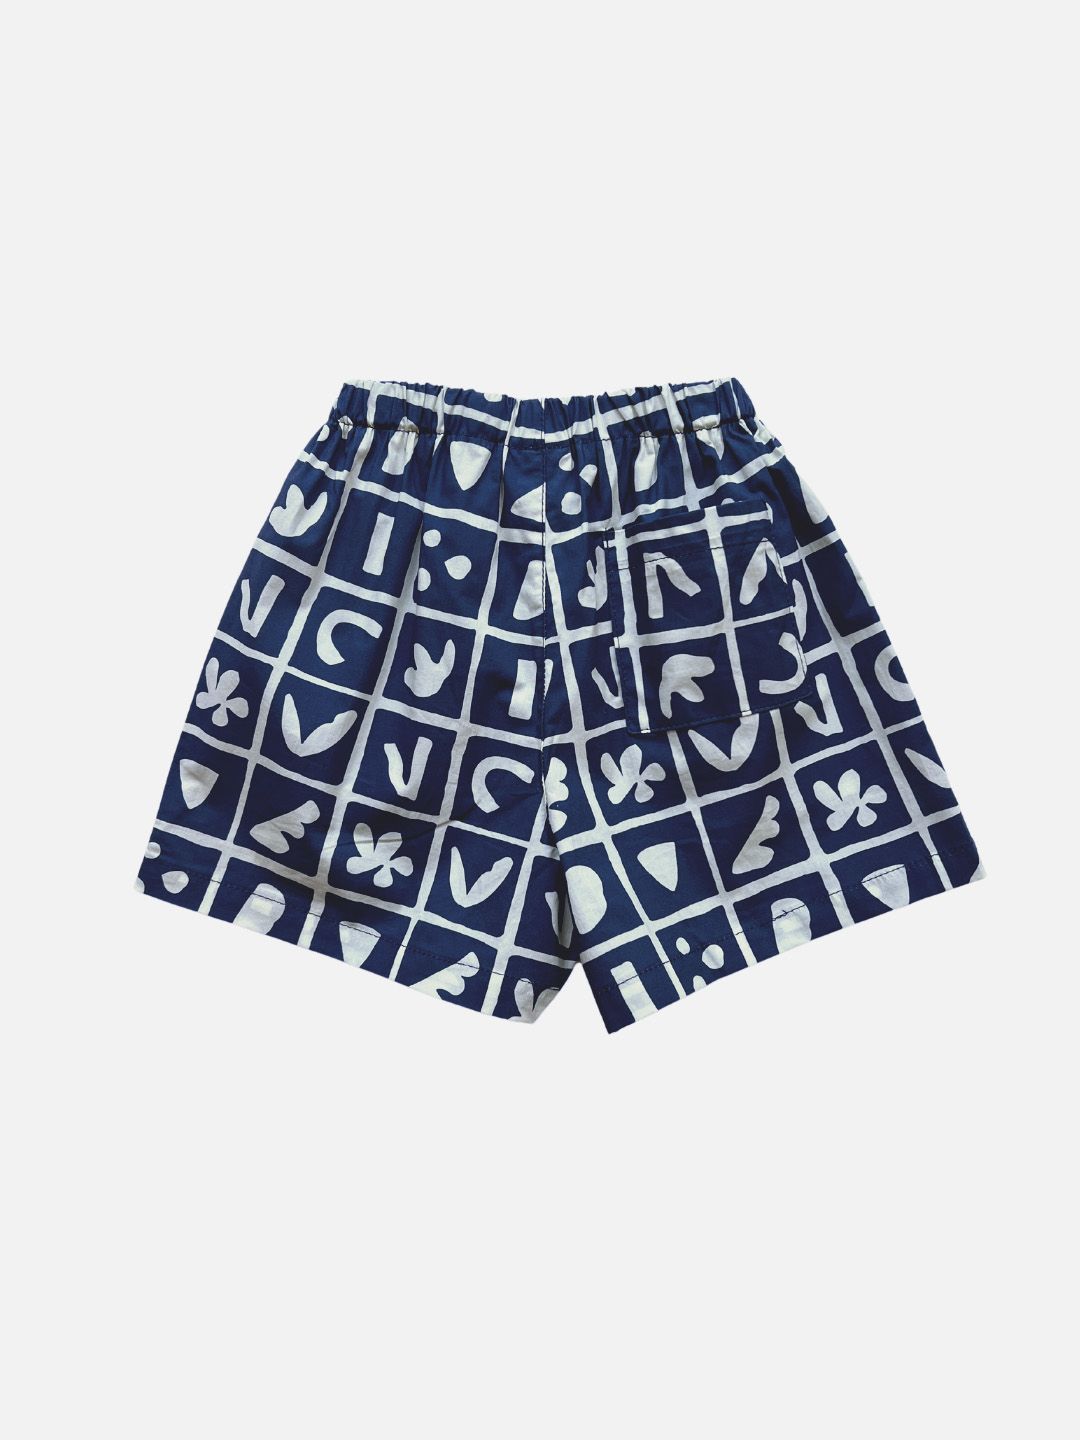 Blue | A pair of kids' shorts in deep blue, overlaid with a grid of different shapes in white, with back pocket, rear view